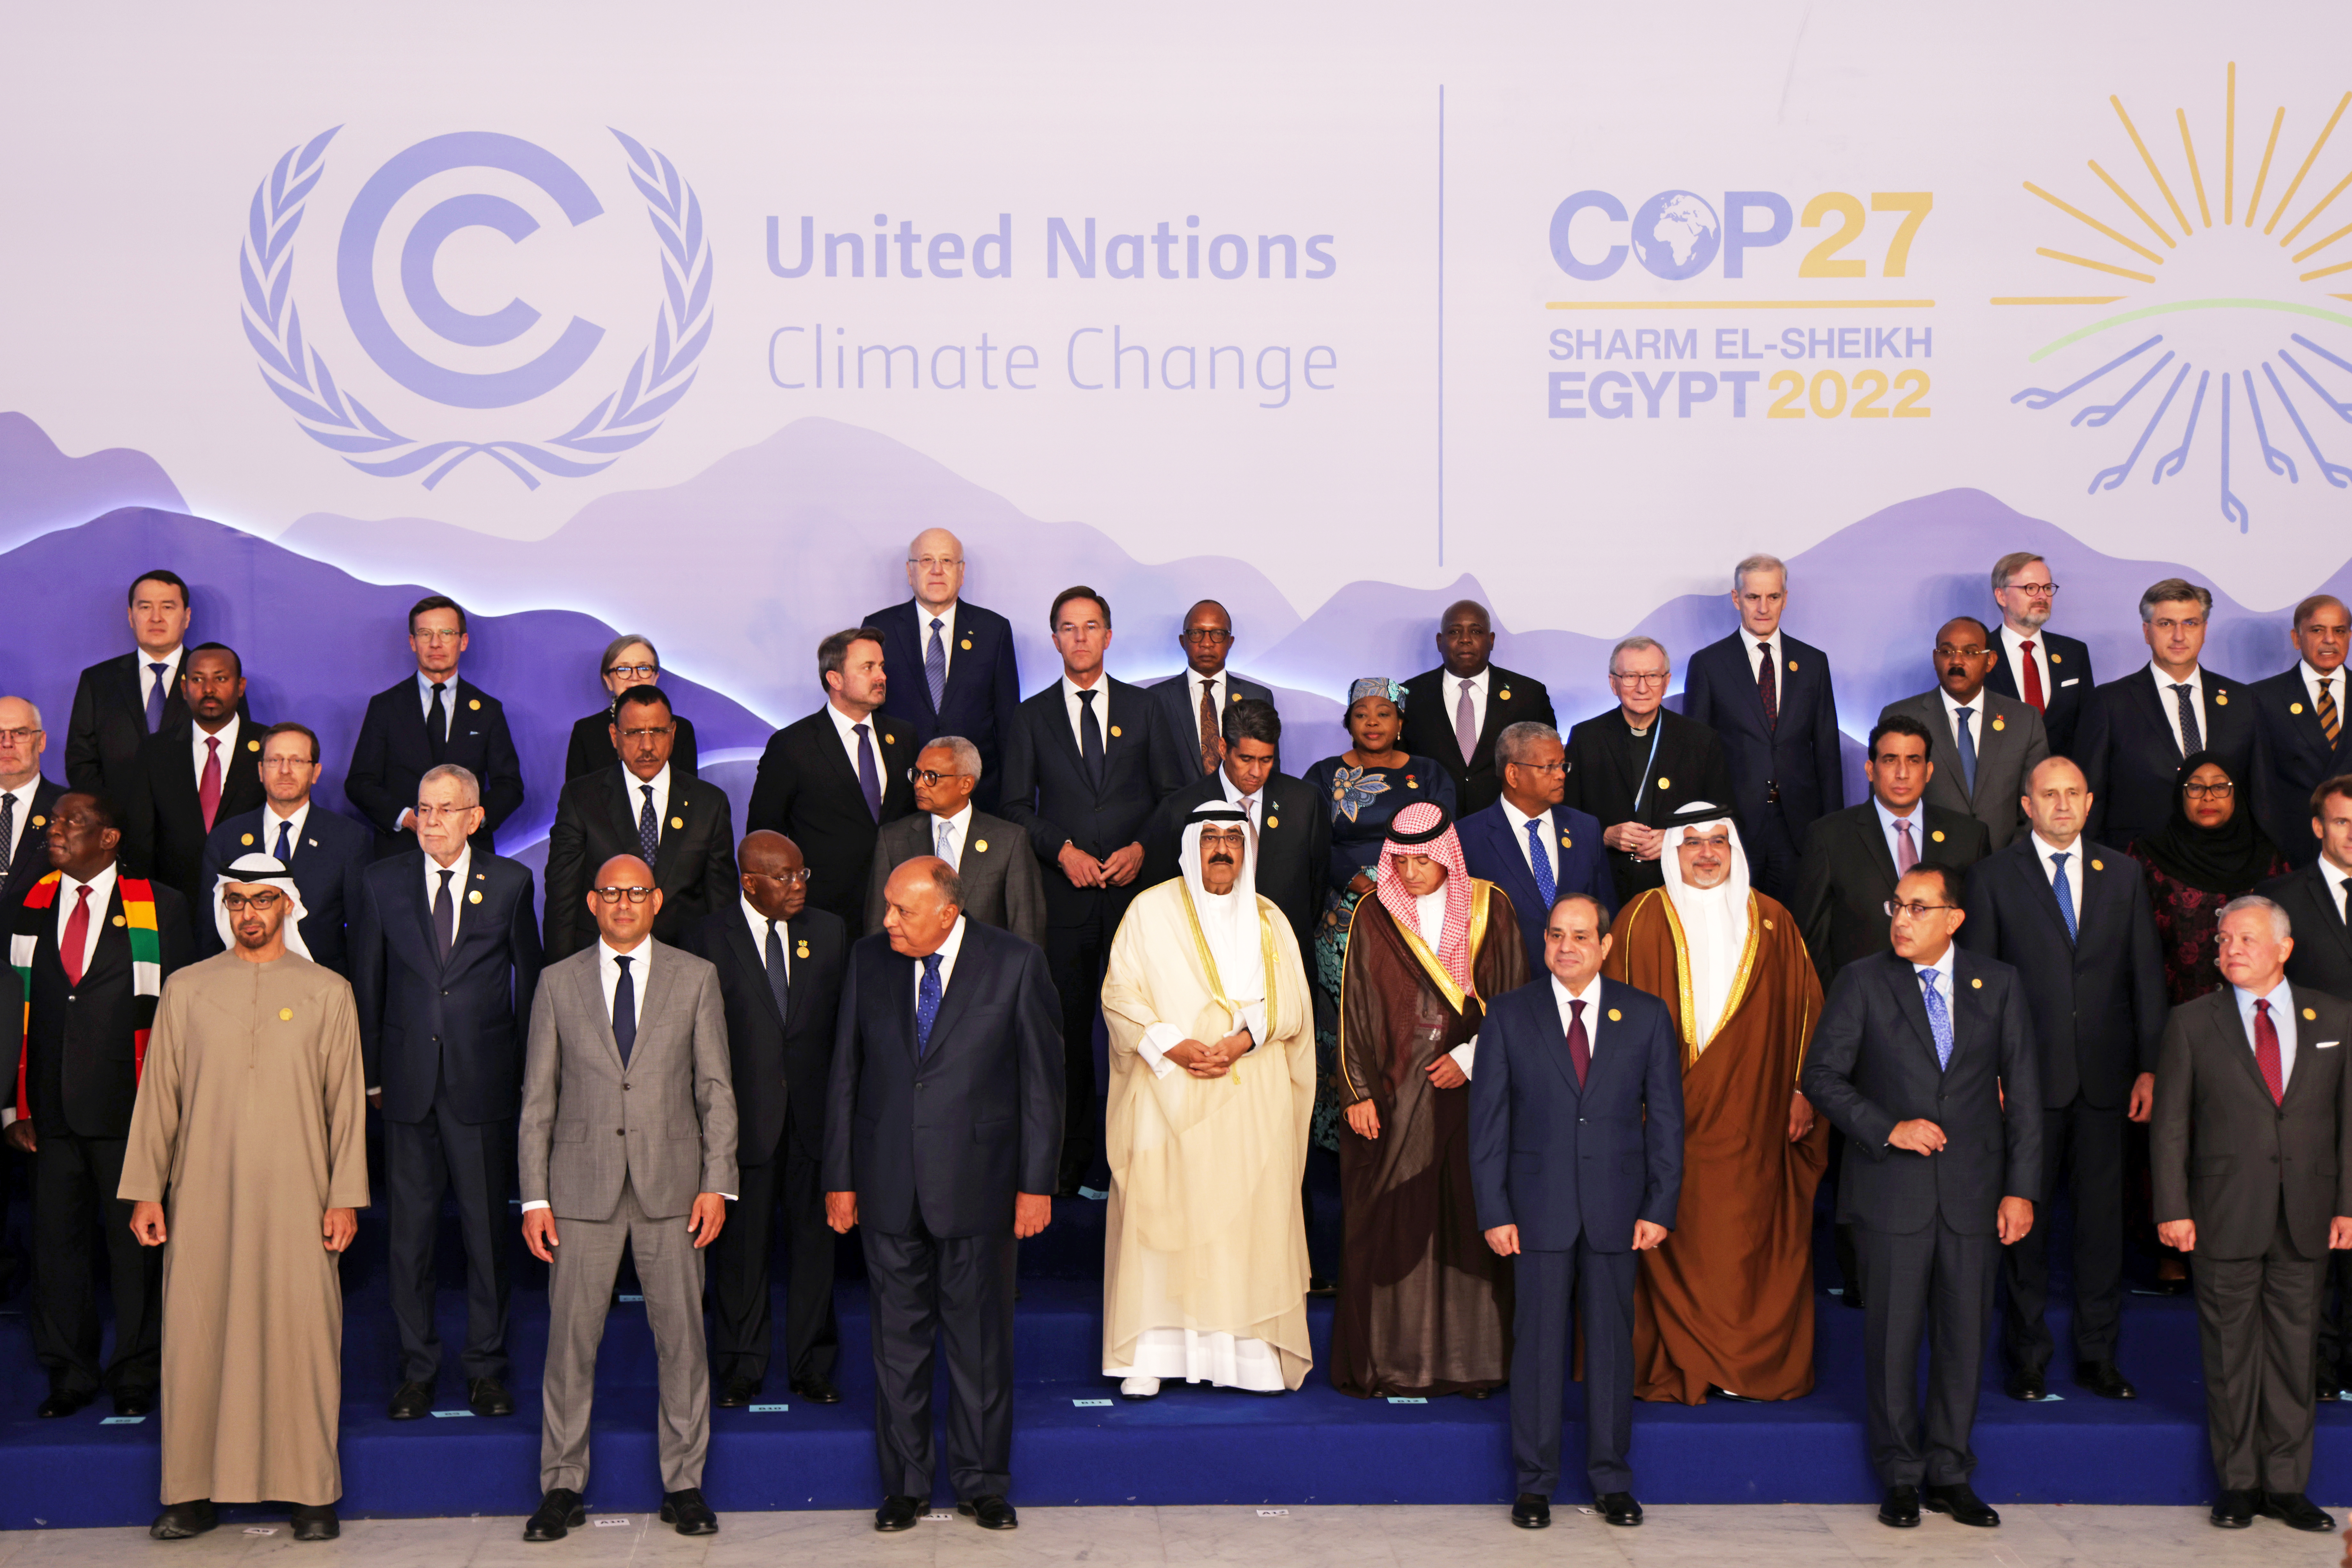 A group photo of leaders from many countries standing against a purple COP27 background. 